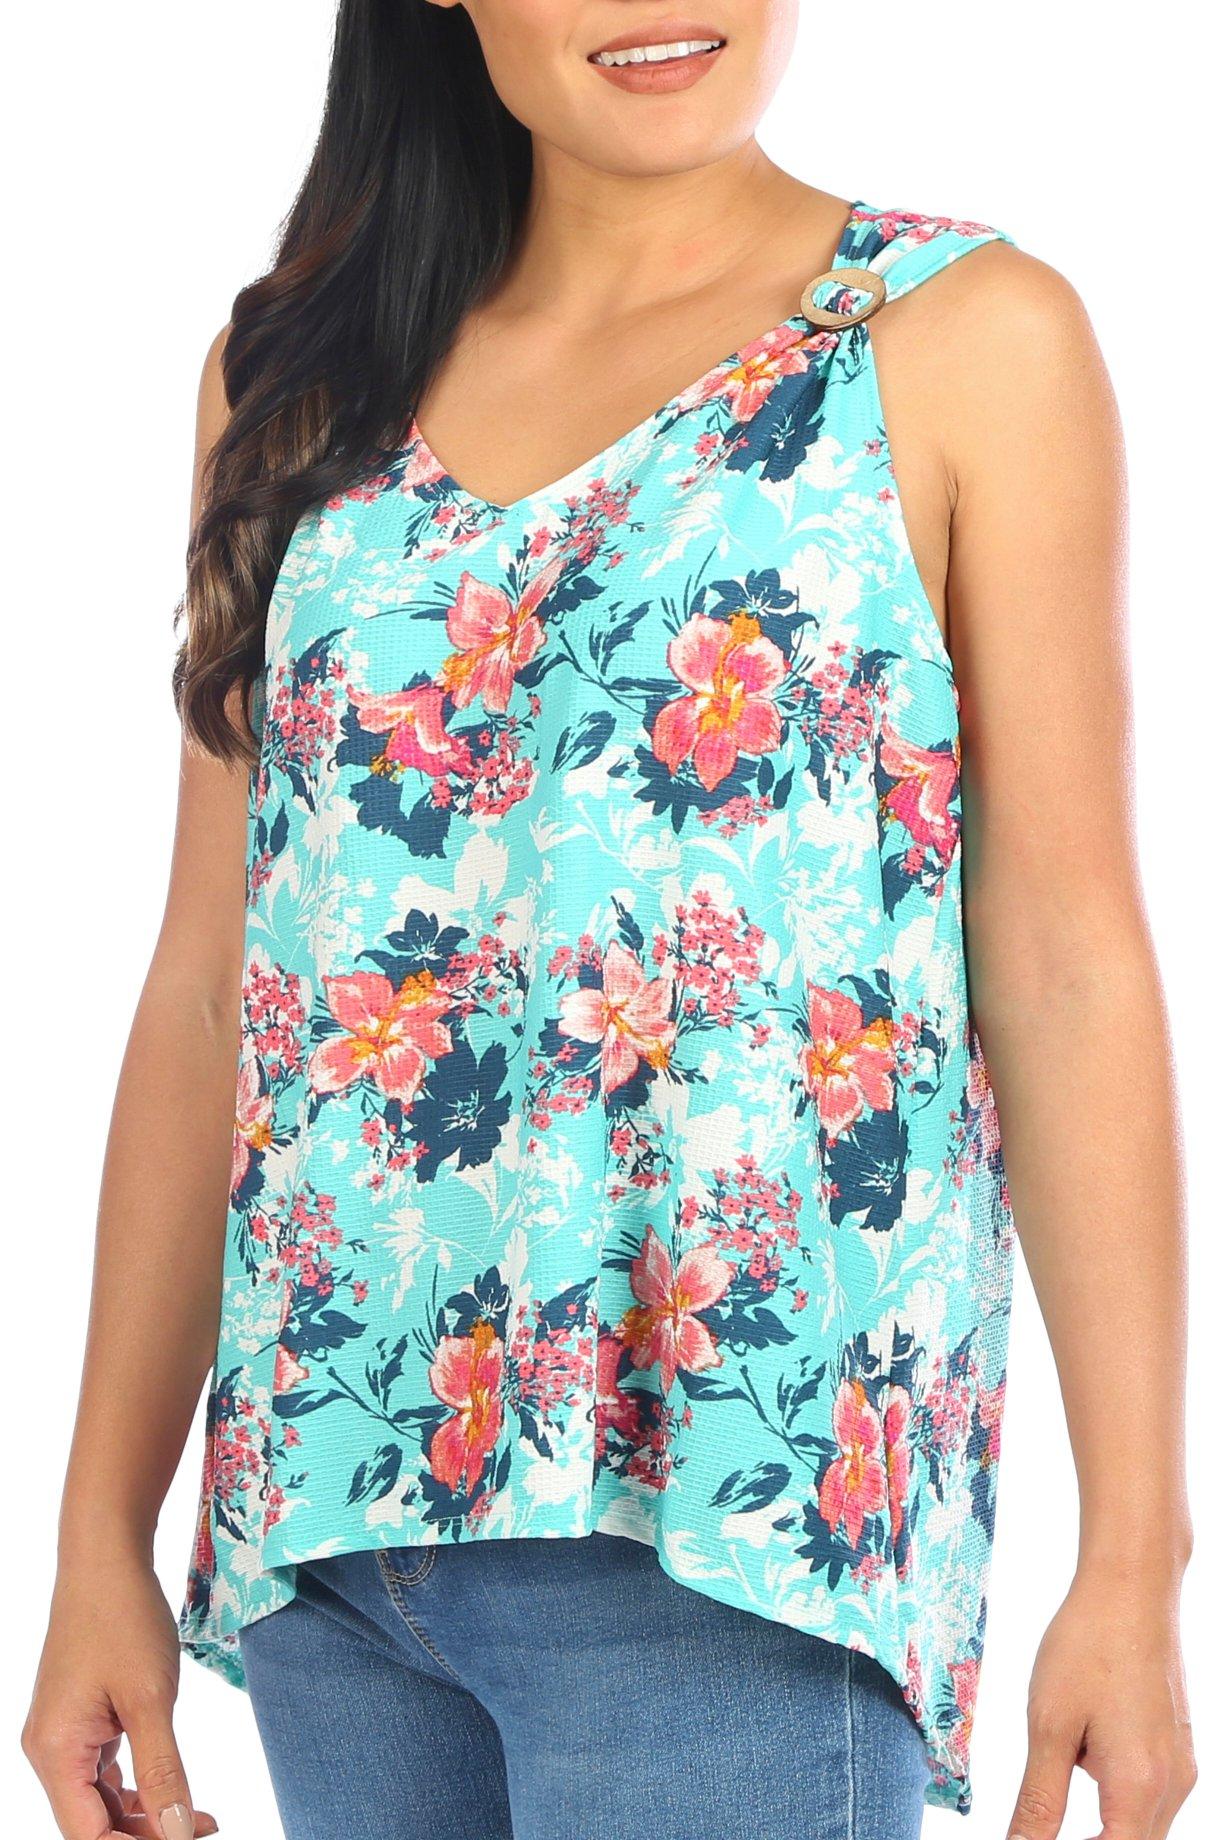 Juniper + Lime Womens Hibiscus Coconut Ring Sleeveless Top